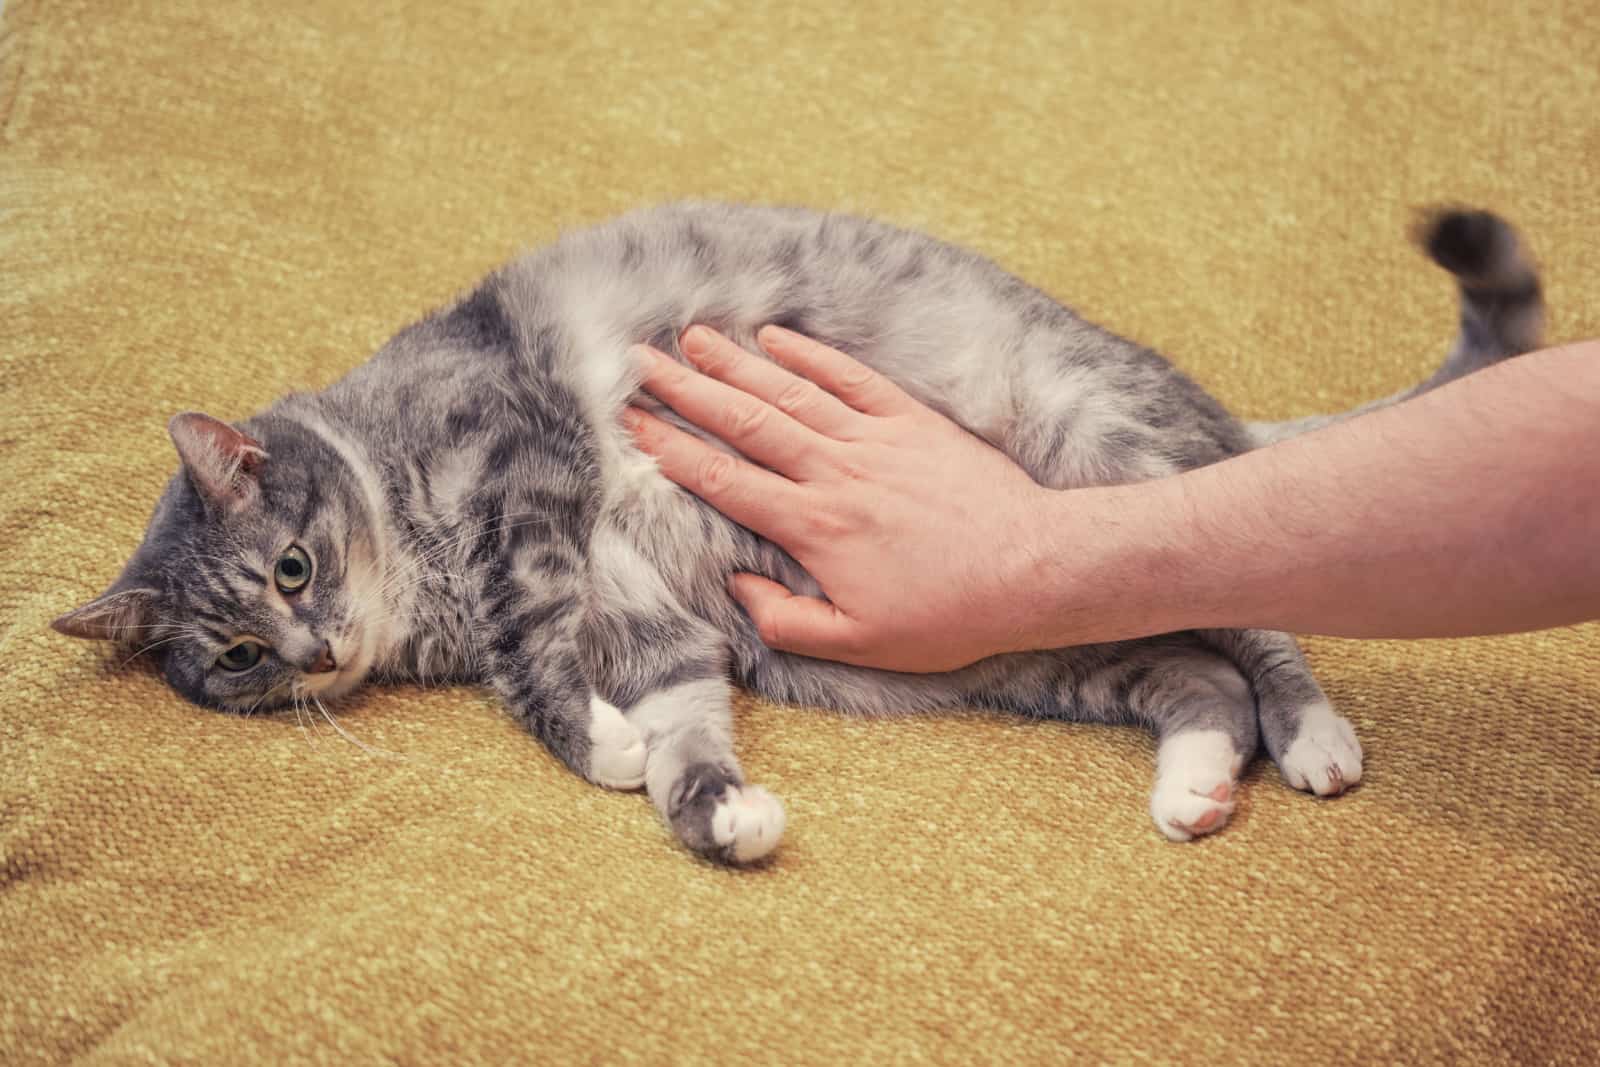 A man hand strokes a cat with IBS